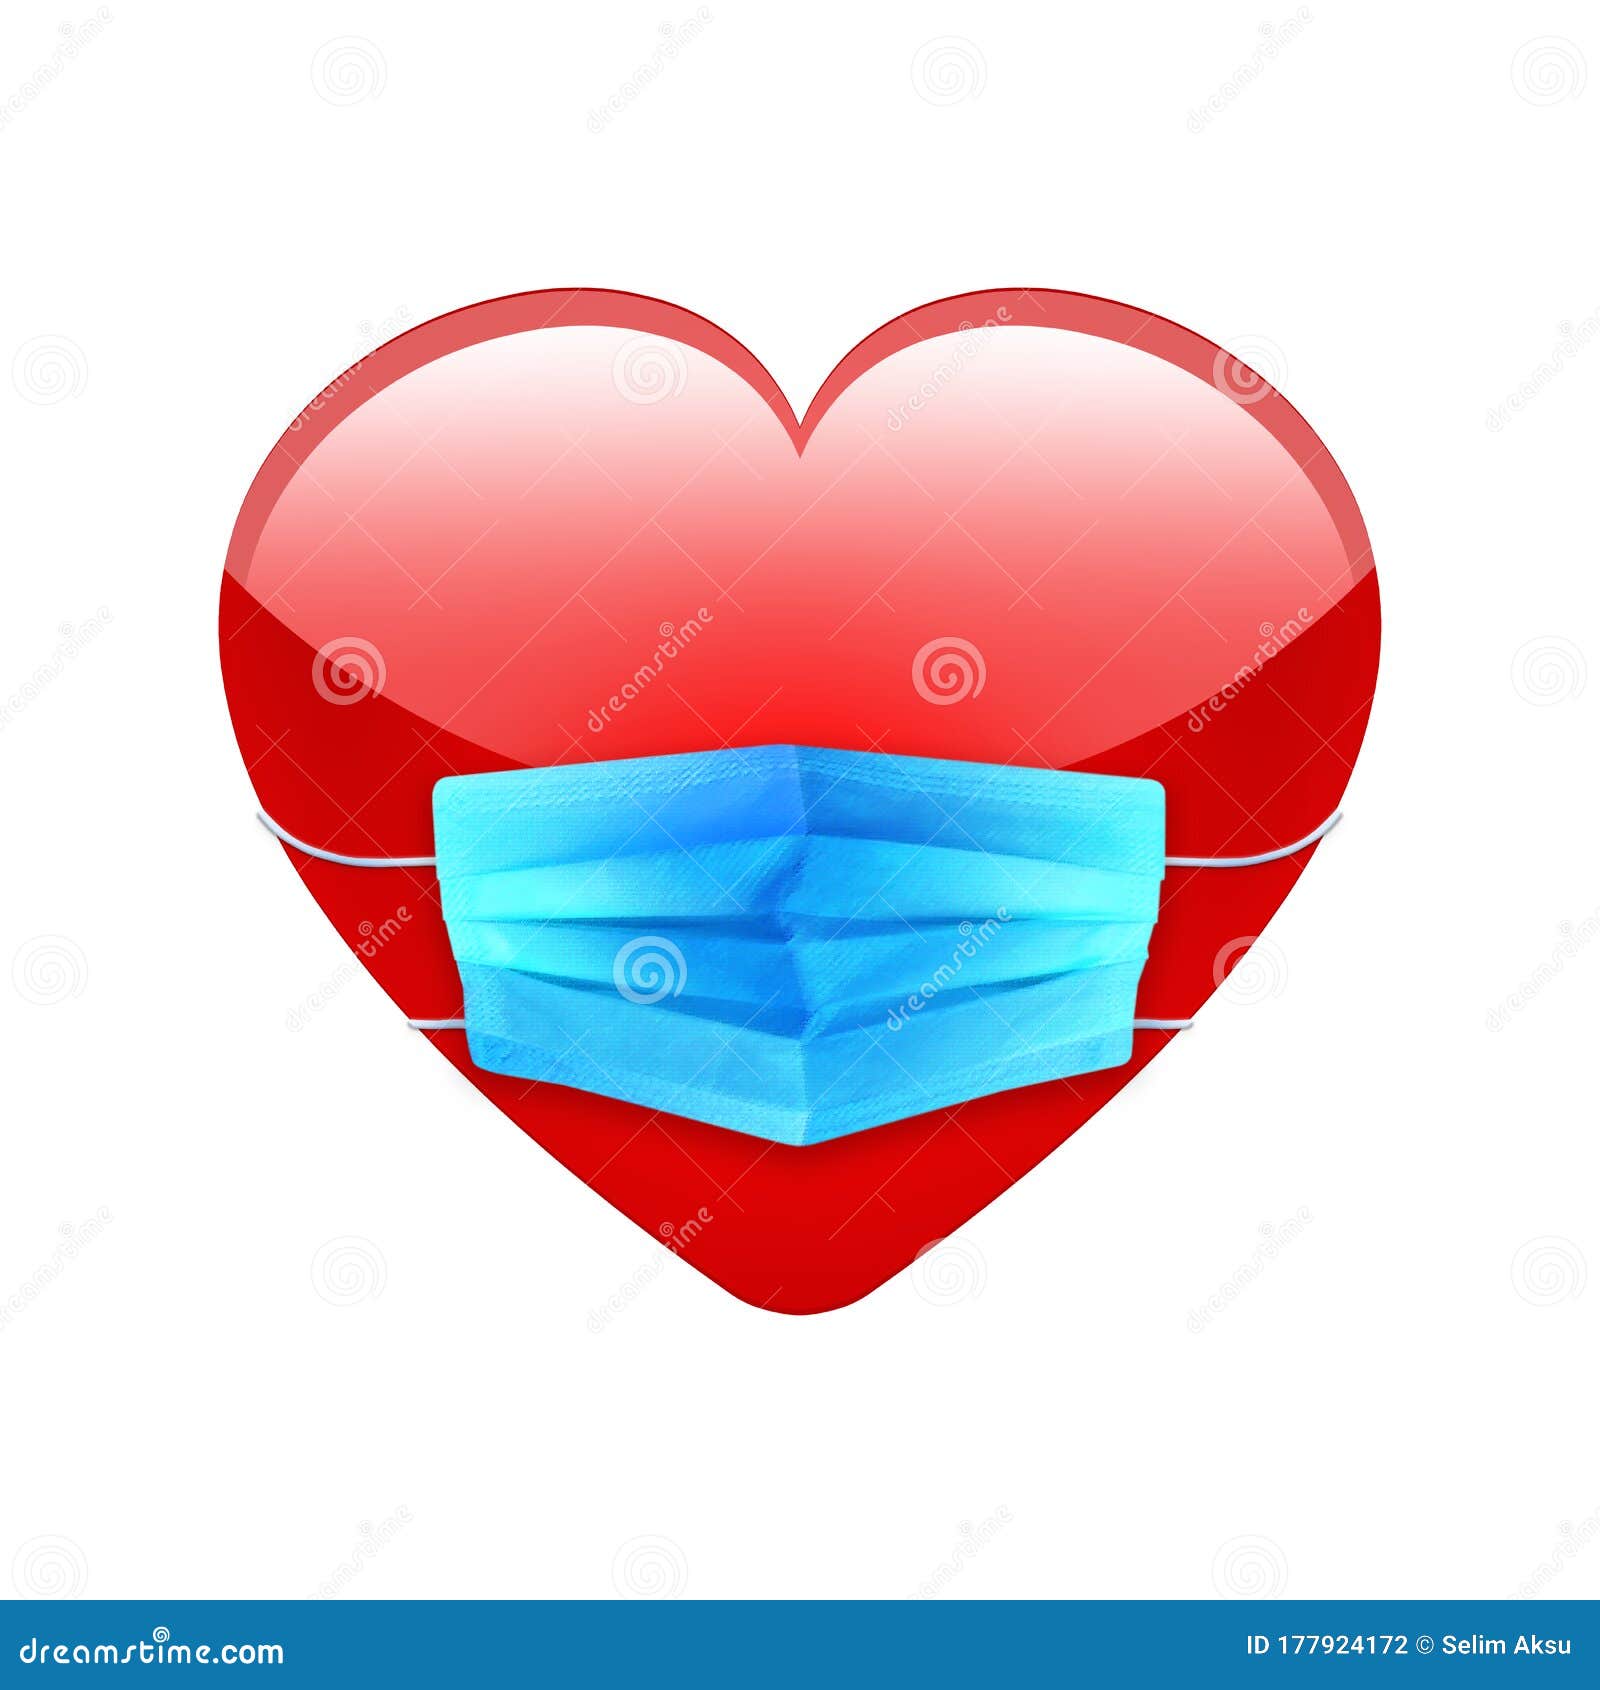 a red heart wearing a surgical mask.